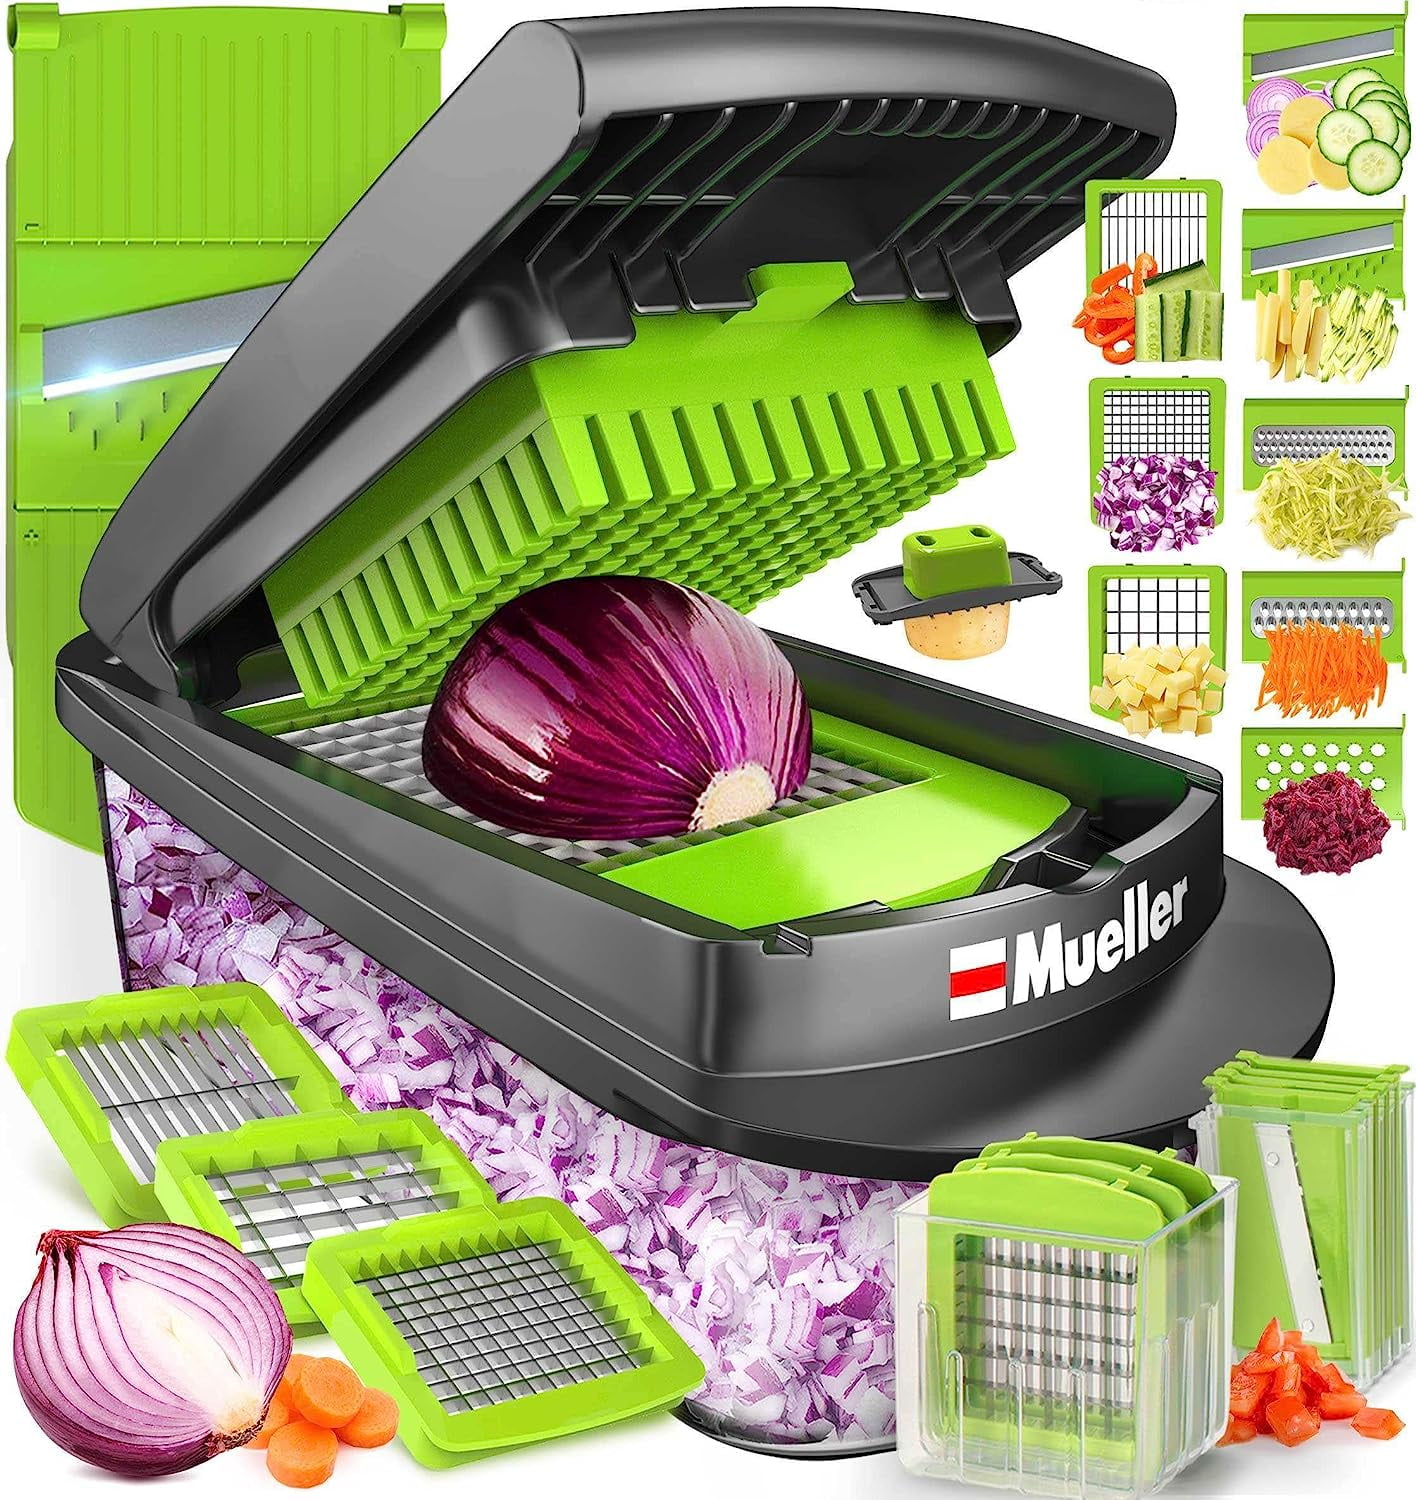 Mueller Pro-Series 10-in-1, Blade Vegetable Chopper, Onion Mincer, Cutter,  Dicer, Egg Slicer with Container